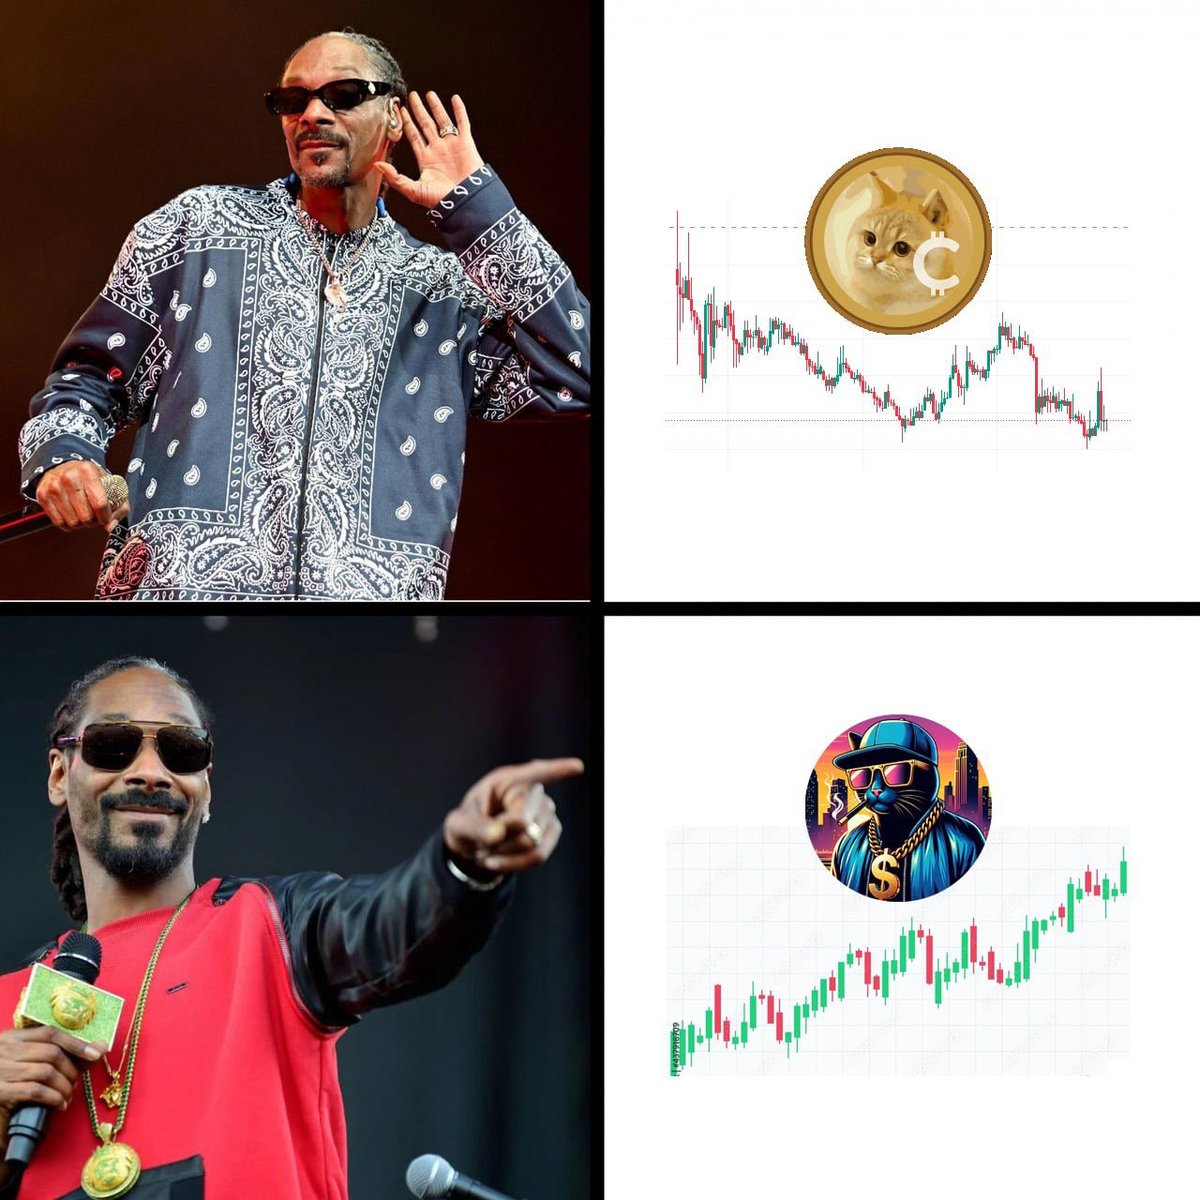 🐱Inspired by the legendary Snoop Dogg but forged in the crucible of the underworld,
🐱 Website: snoopcats.org
🐱 Twitter: twitter.com/snoopcattoken
#snoopcat #memecoin #BSC 
VJIAW4

#wallstreet #investors #cryptocurrencymining #Retroactive #cryptowallet